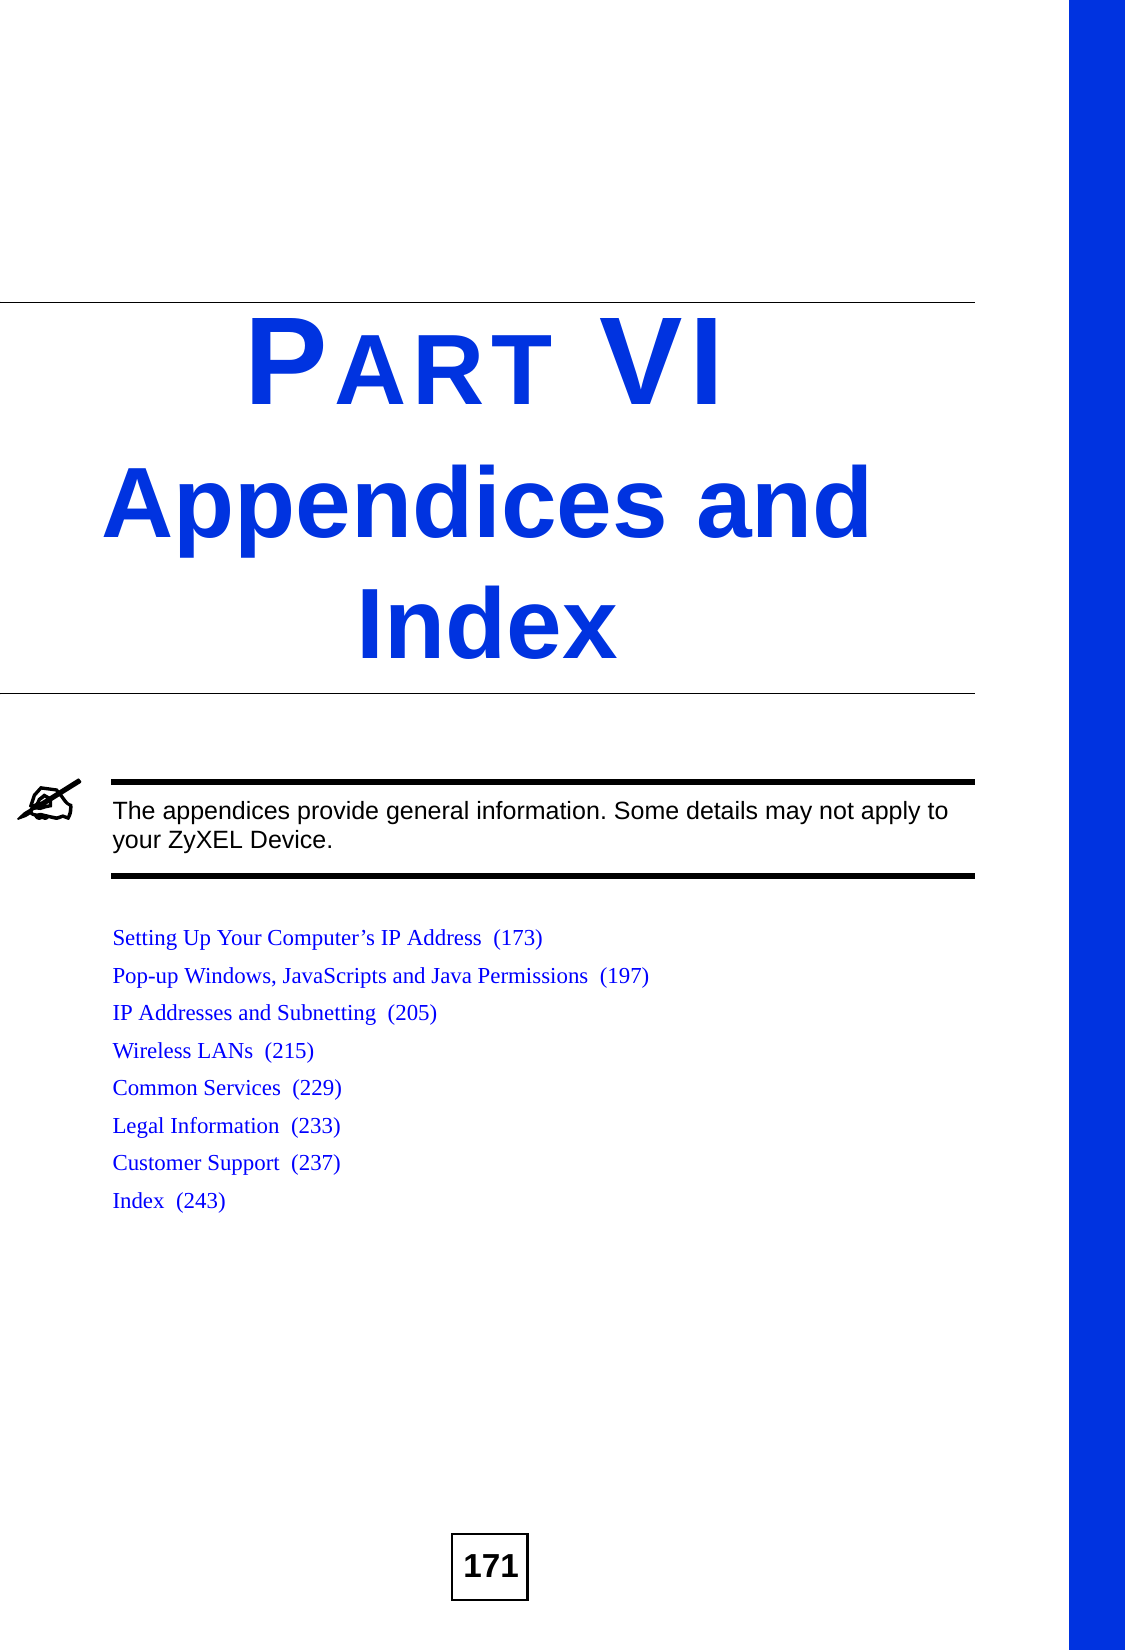 171PART VIAppendices and Index&quot;The appendices provide general information. Some details may not apply to your ZyXEL Device.Setting Up Your Computer’s IP Address  (173)Pop-up Windows, JavaScripts and Java Permissions  (197)IP Addresses and Subnetting  (205)Wireless LANs  (215)Common Services  (229)Legal Information  (233)Customer Support  (237)Index  (243)